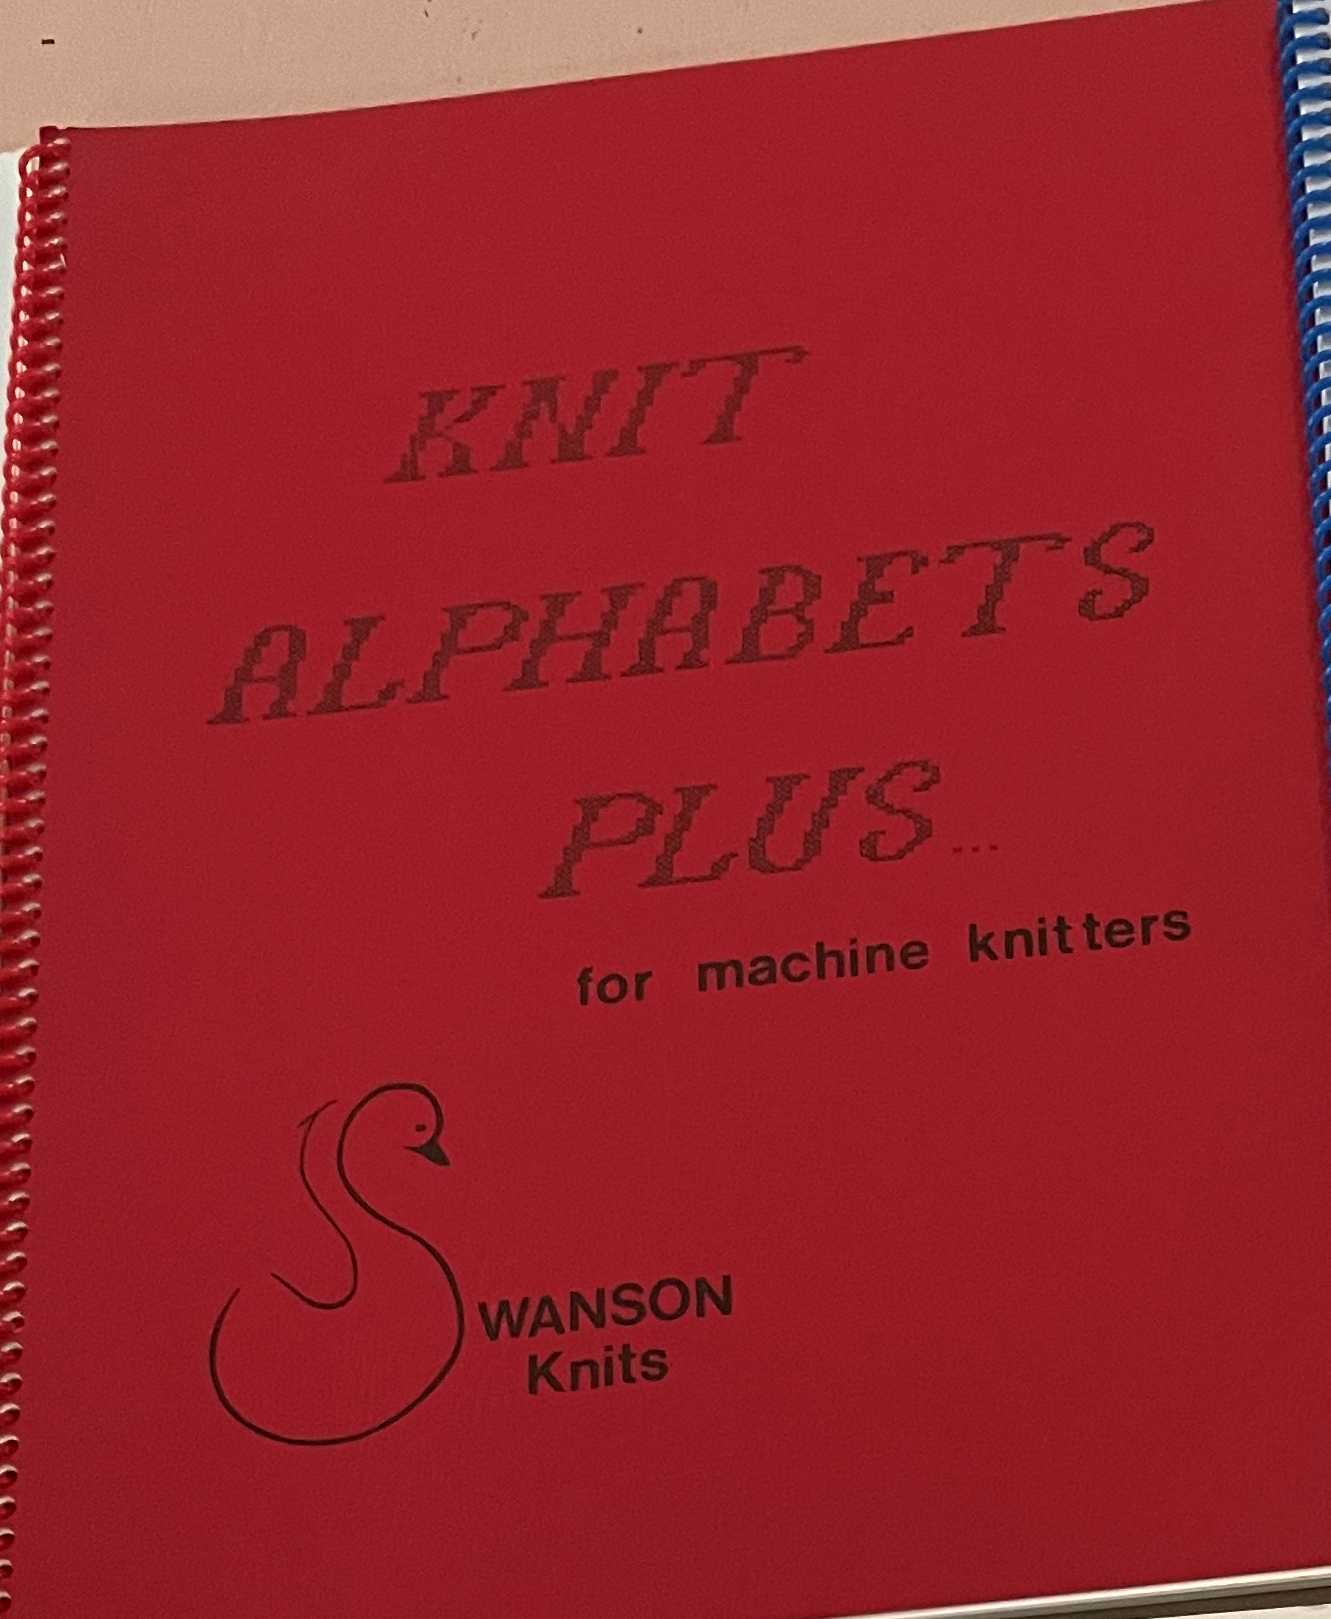 Knit Alphabets Plus for machine knitters